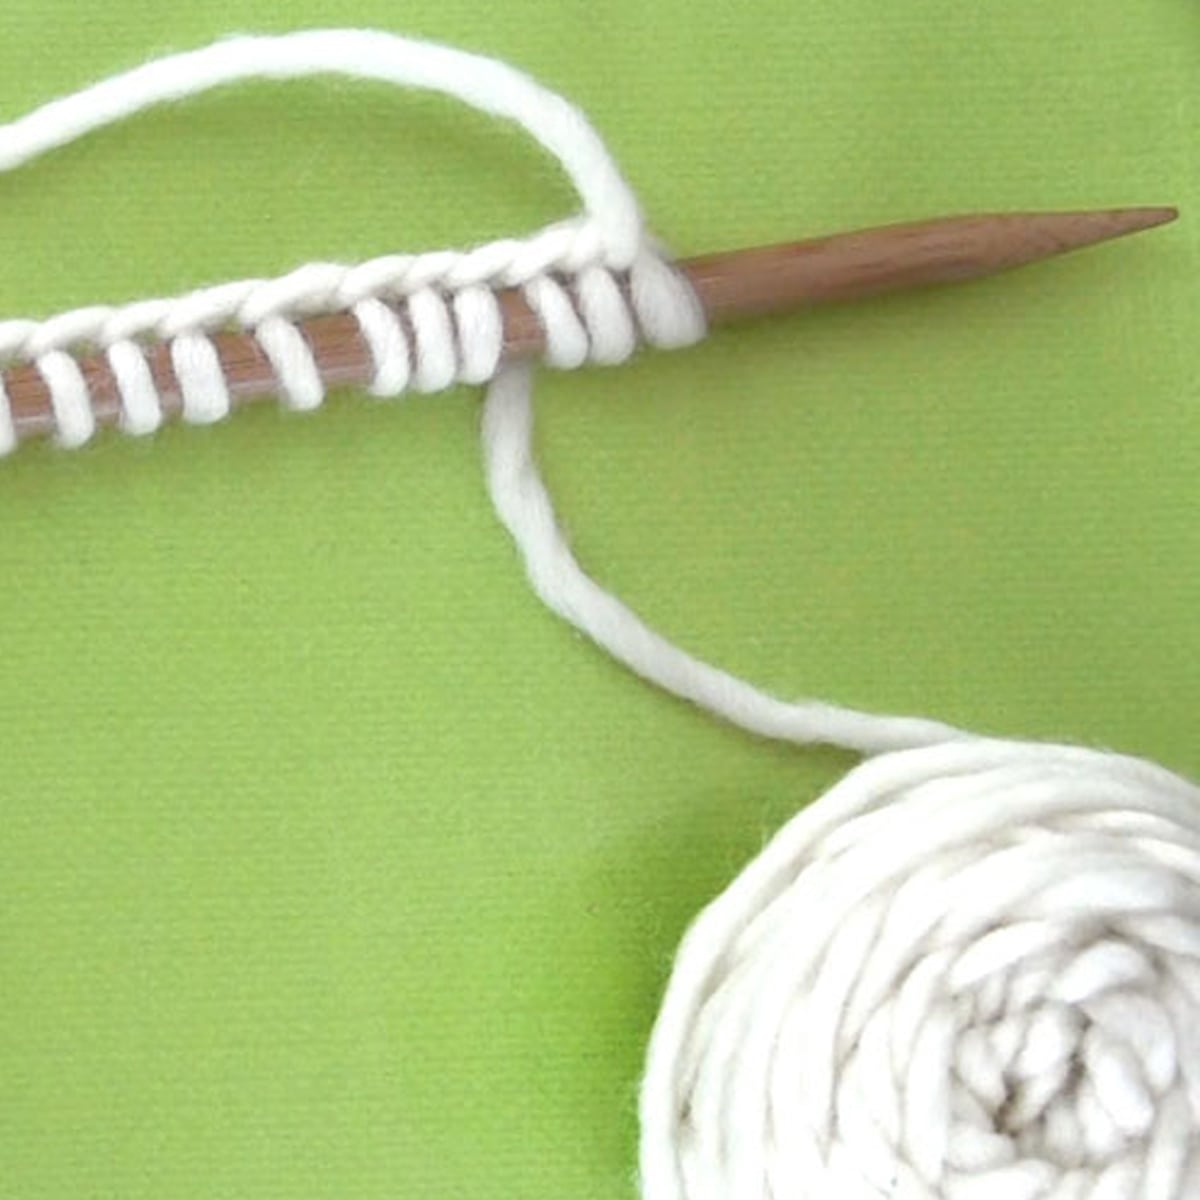 Why You Need a Tapestry Needle to Knit 